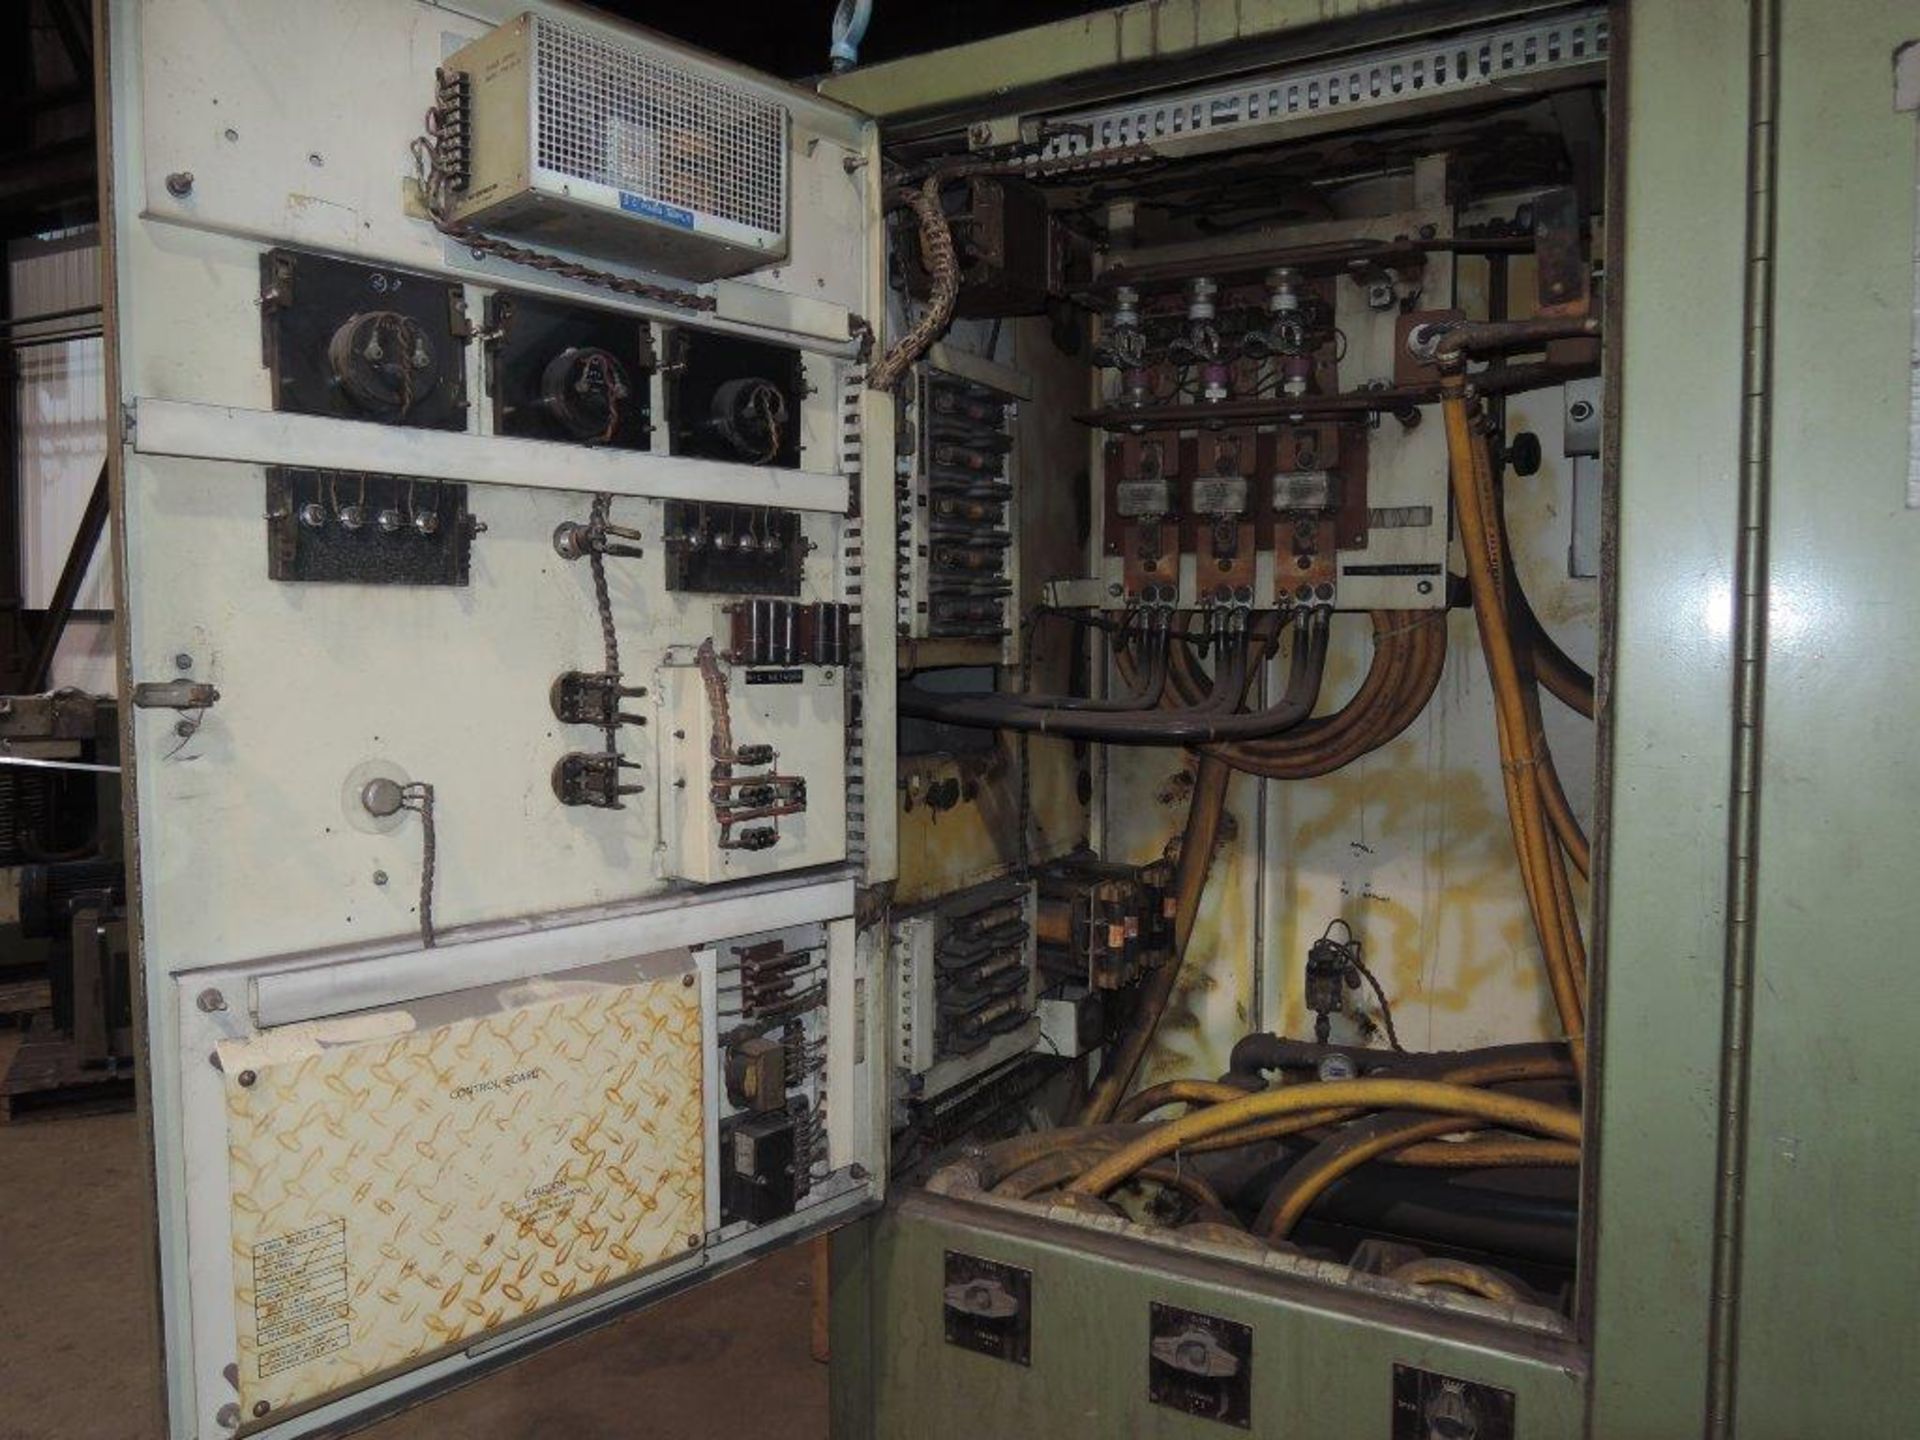 1980 INDUCTOTHERM MODEL VIP MK IV CORELESS INDUCTION POWER SUPPLY S/N 80-75180-244-11 - Image 4 of 5